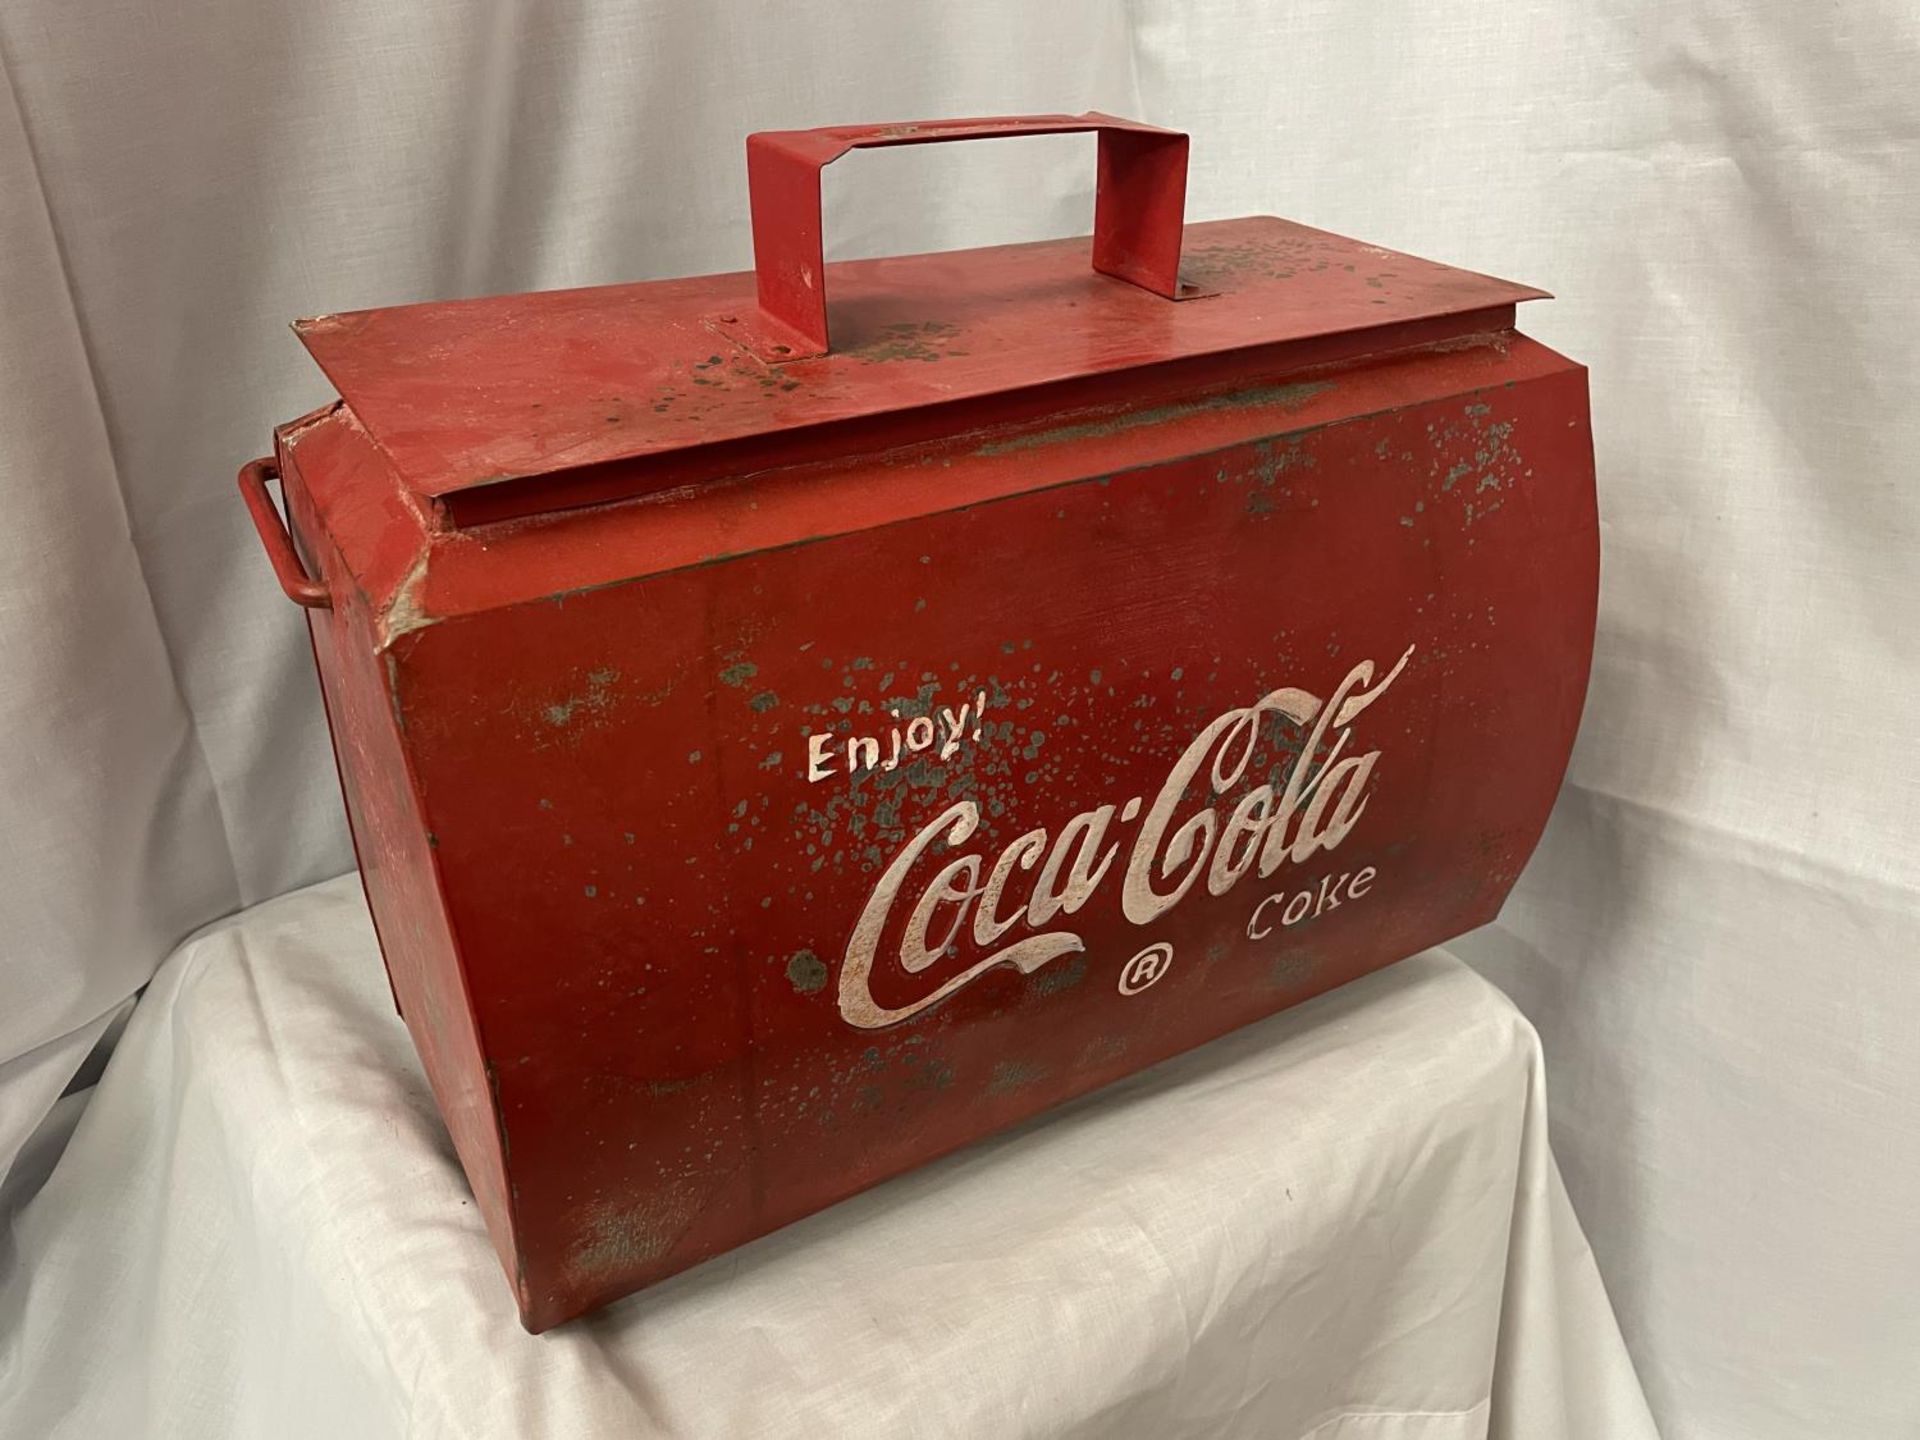 A LARGE METAL 'ENJOY COCA-COLA' LIDDED CONTAINER WITH HANDLE 44CM X 35CM - Image 3 of 3